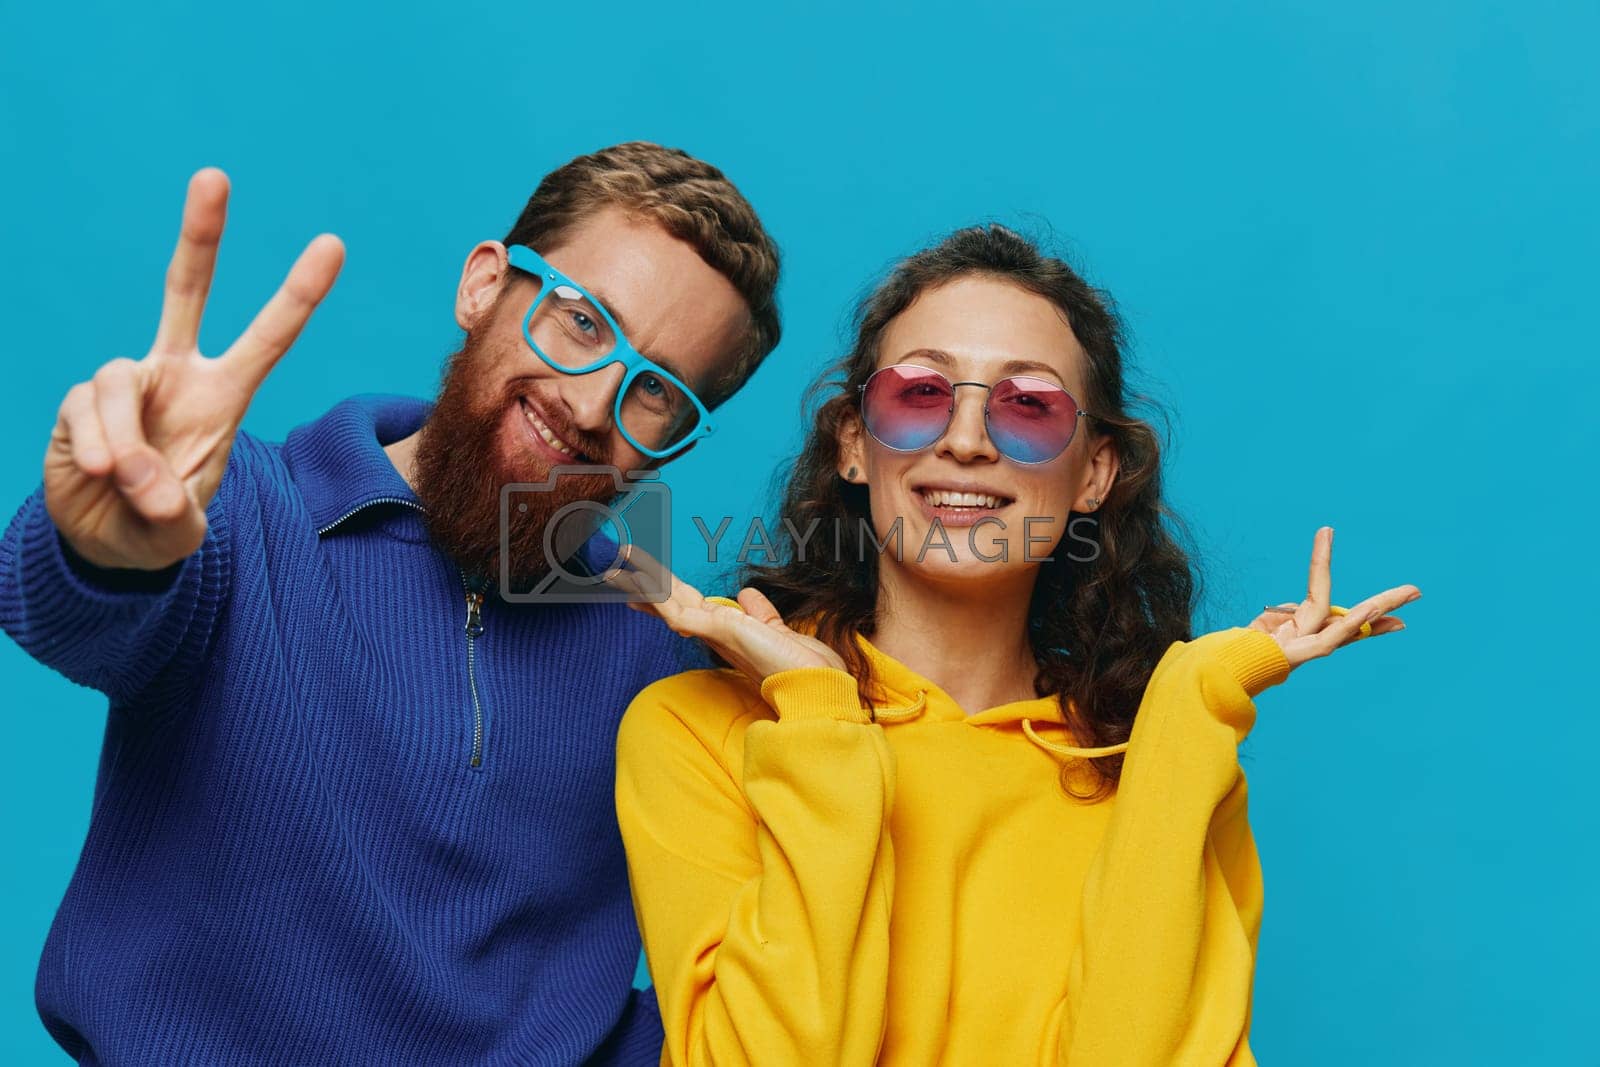 Royalty free image of A woman and a man fun couple cranking and showing signs with their hands smiling cheerfully, on a blue background, The concept of a real relationship in a family. by SHOTPRIME